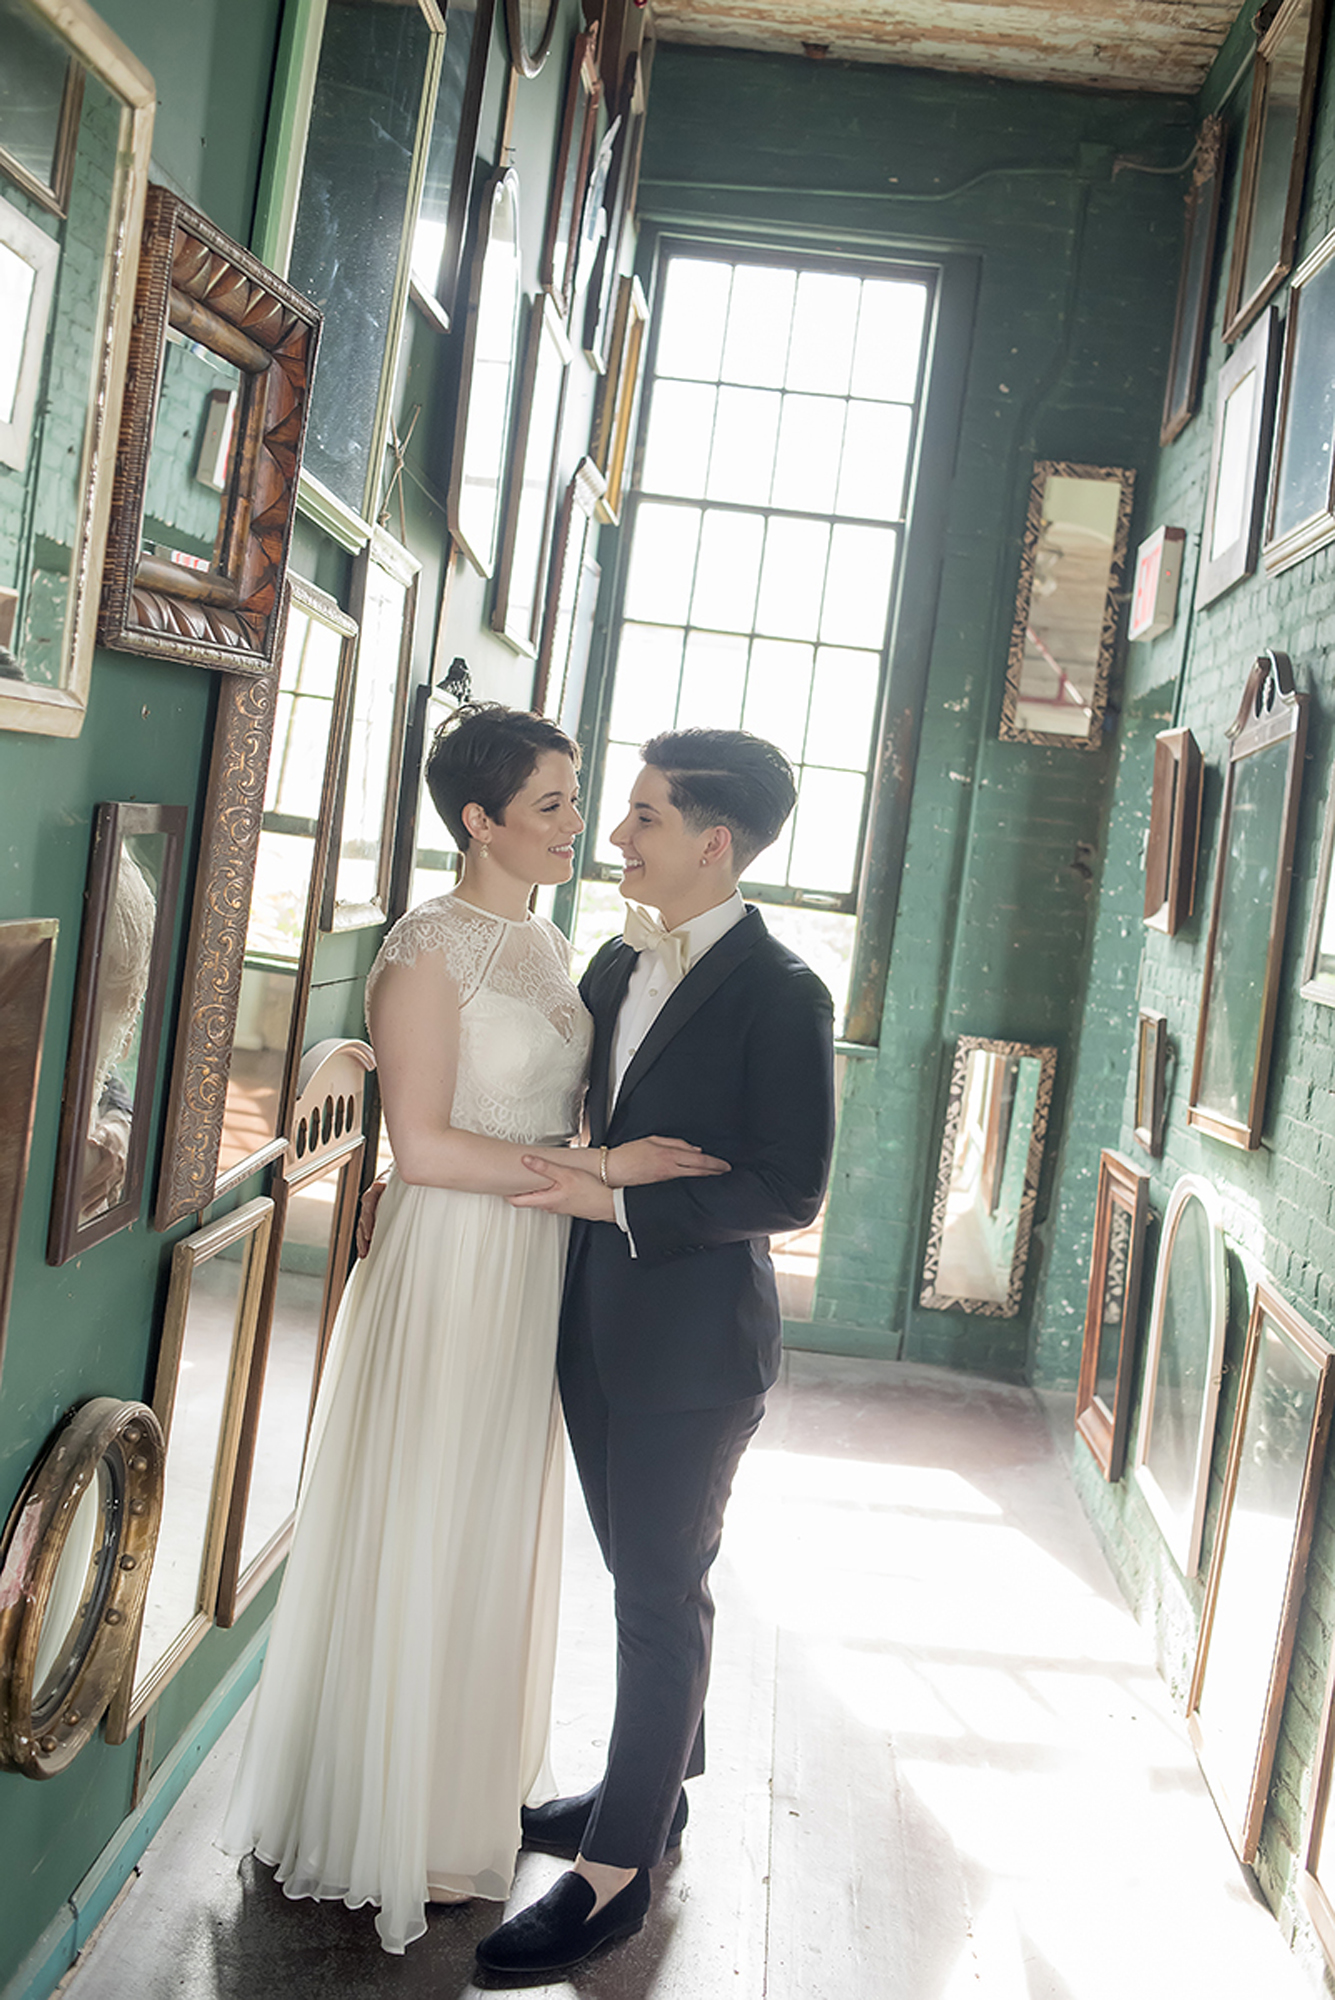 A wedding couple pose in a hall of mirrors 